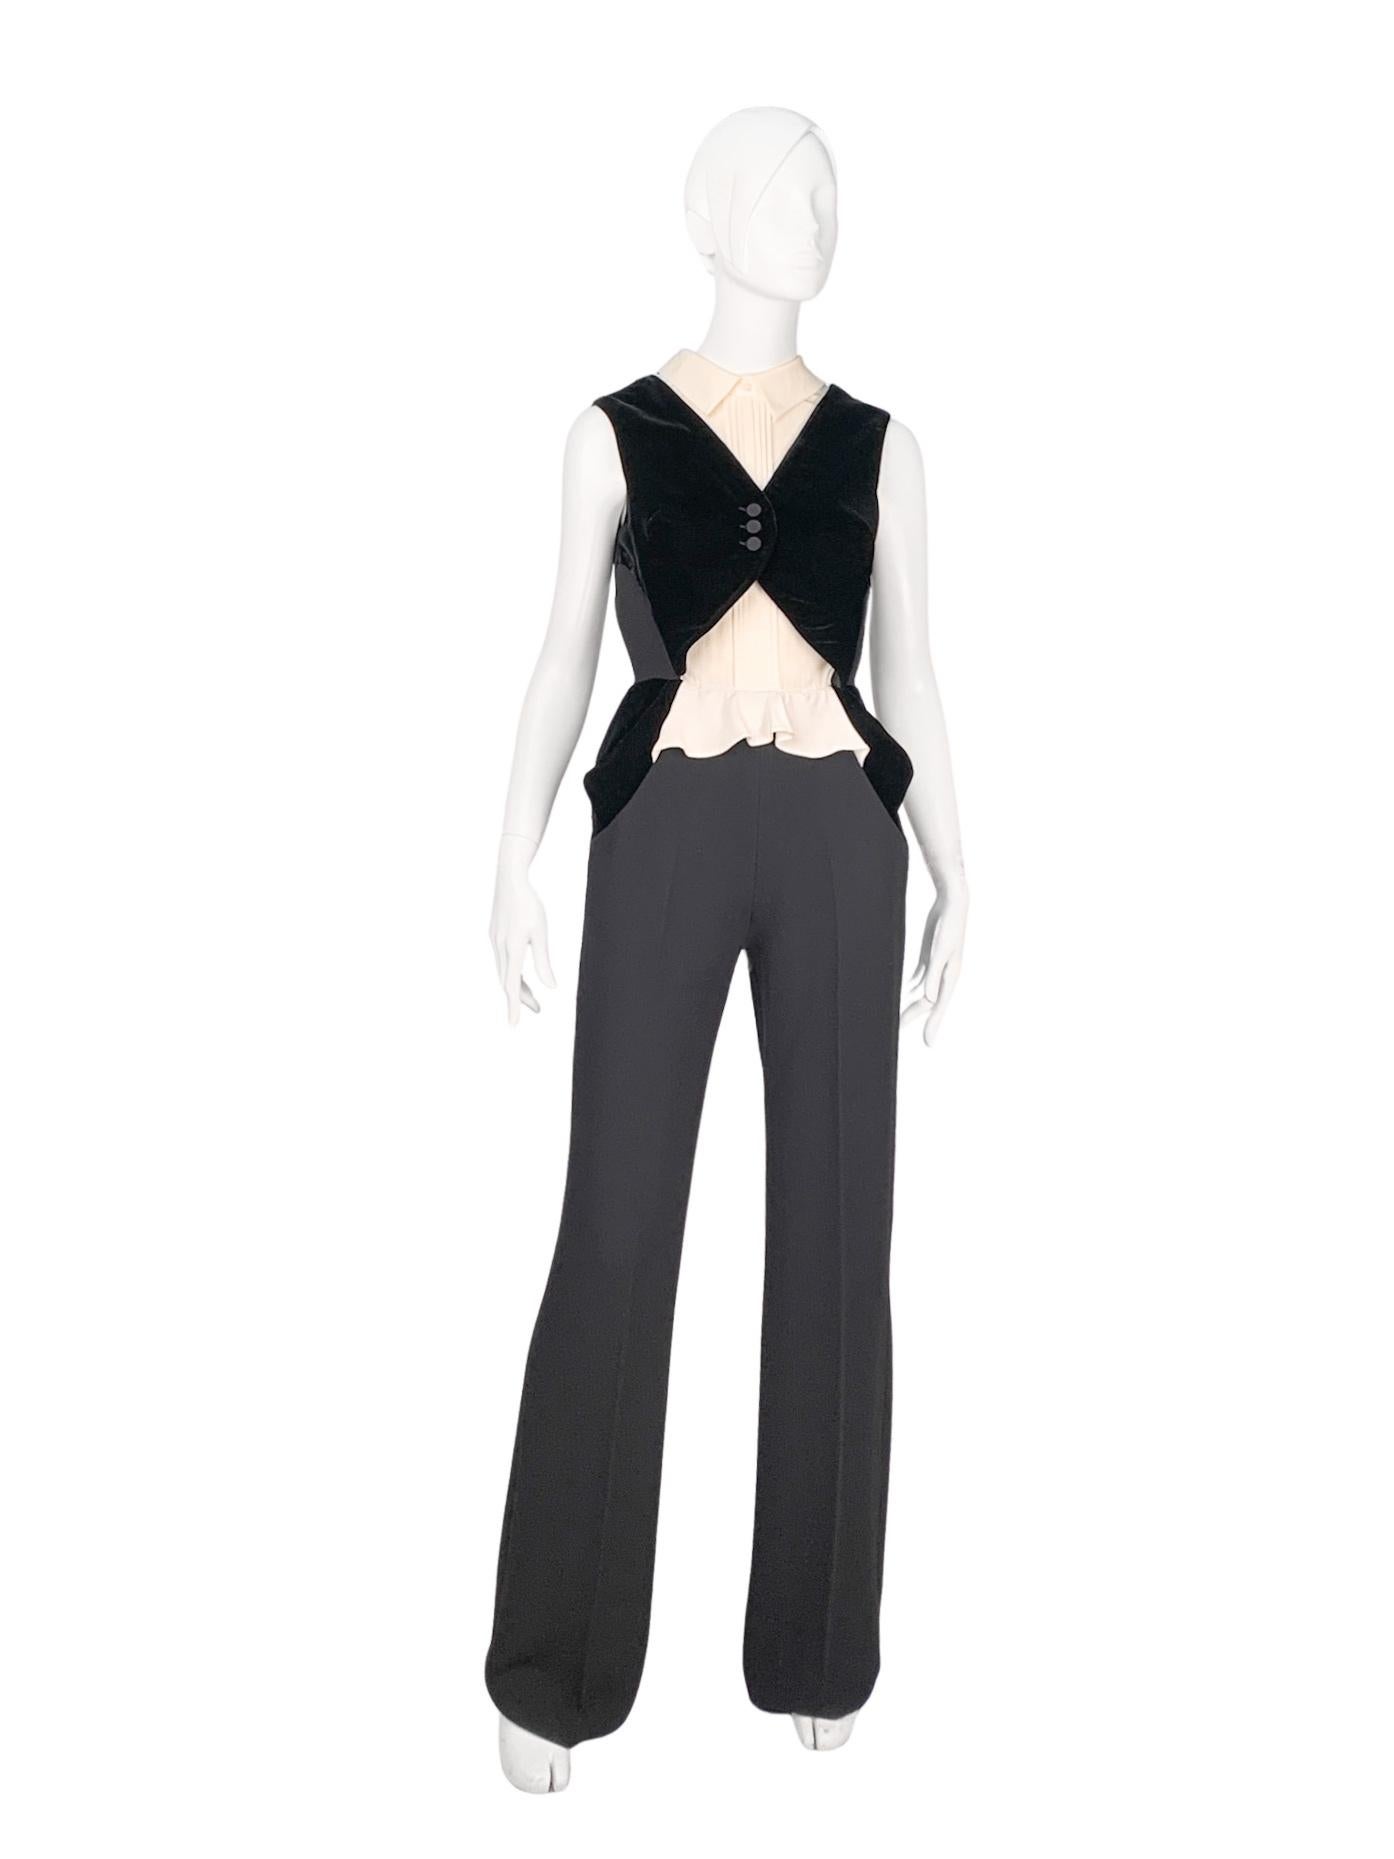 New with tags Ermanno Scervino long jumpsuit in off-white silk and black wool. Designed to visually elongate the legs and narrow the waist, it is adorned with ruffles and decorative pleats at the top and features a high-waisted, wide-leg silhouette